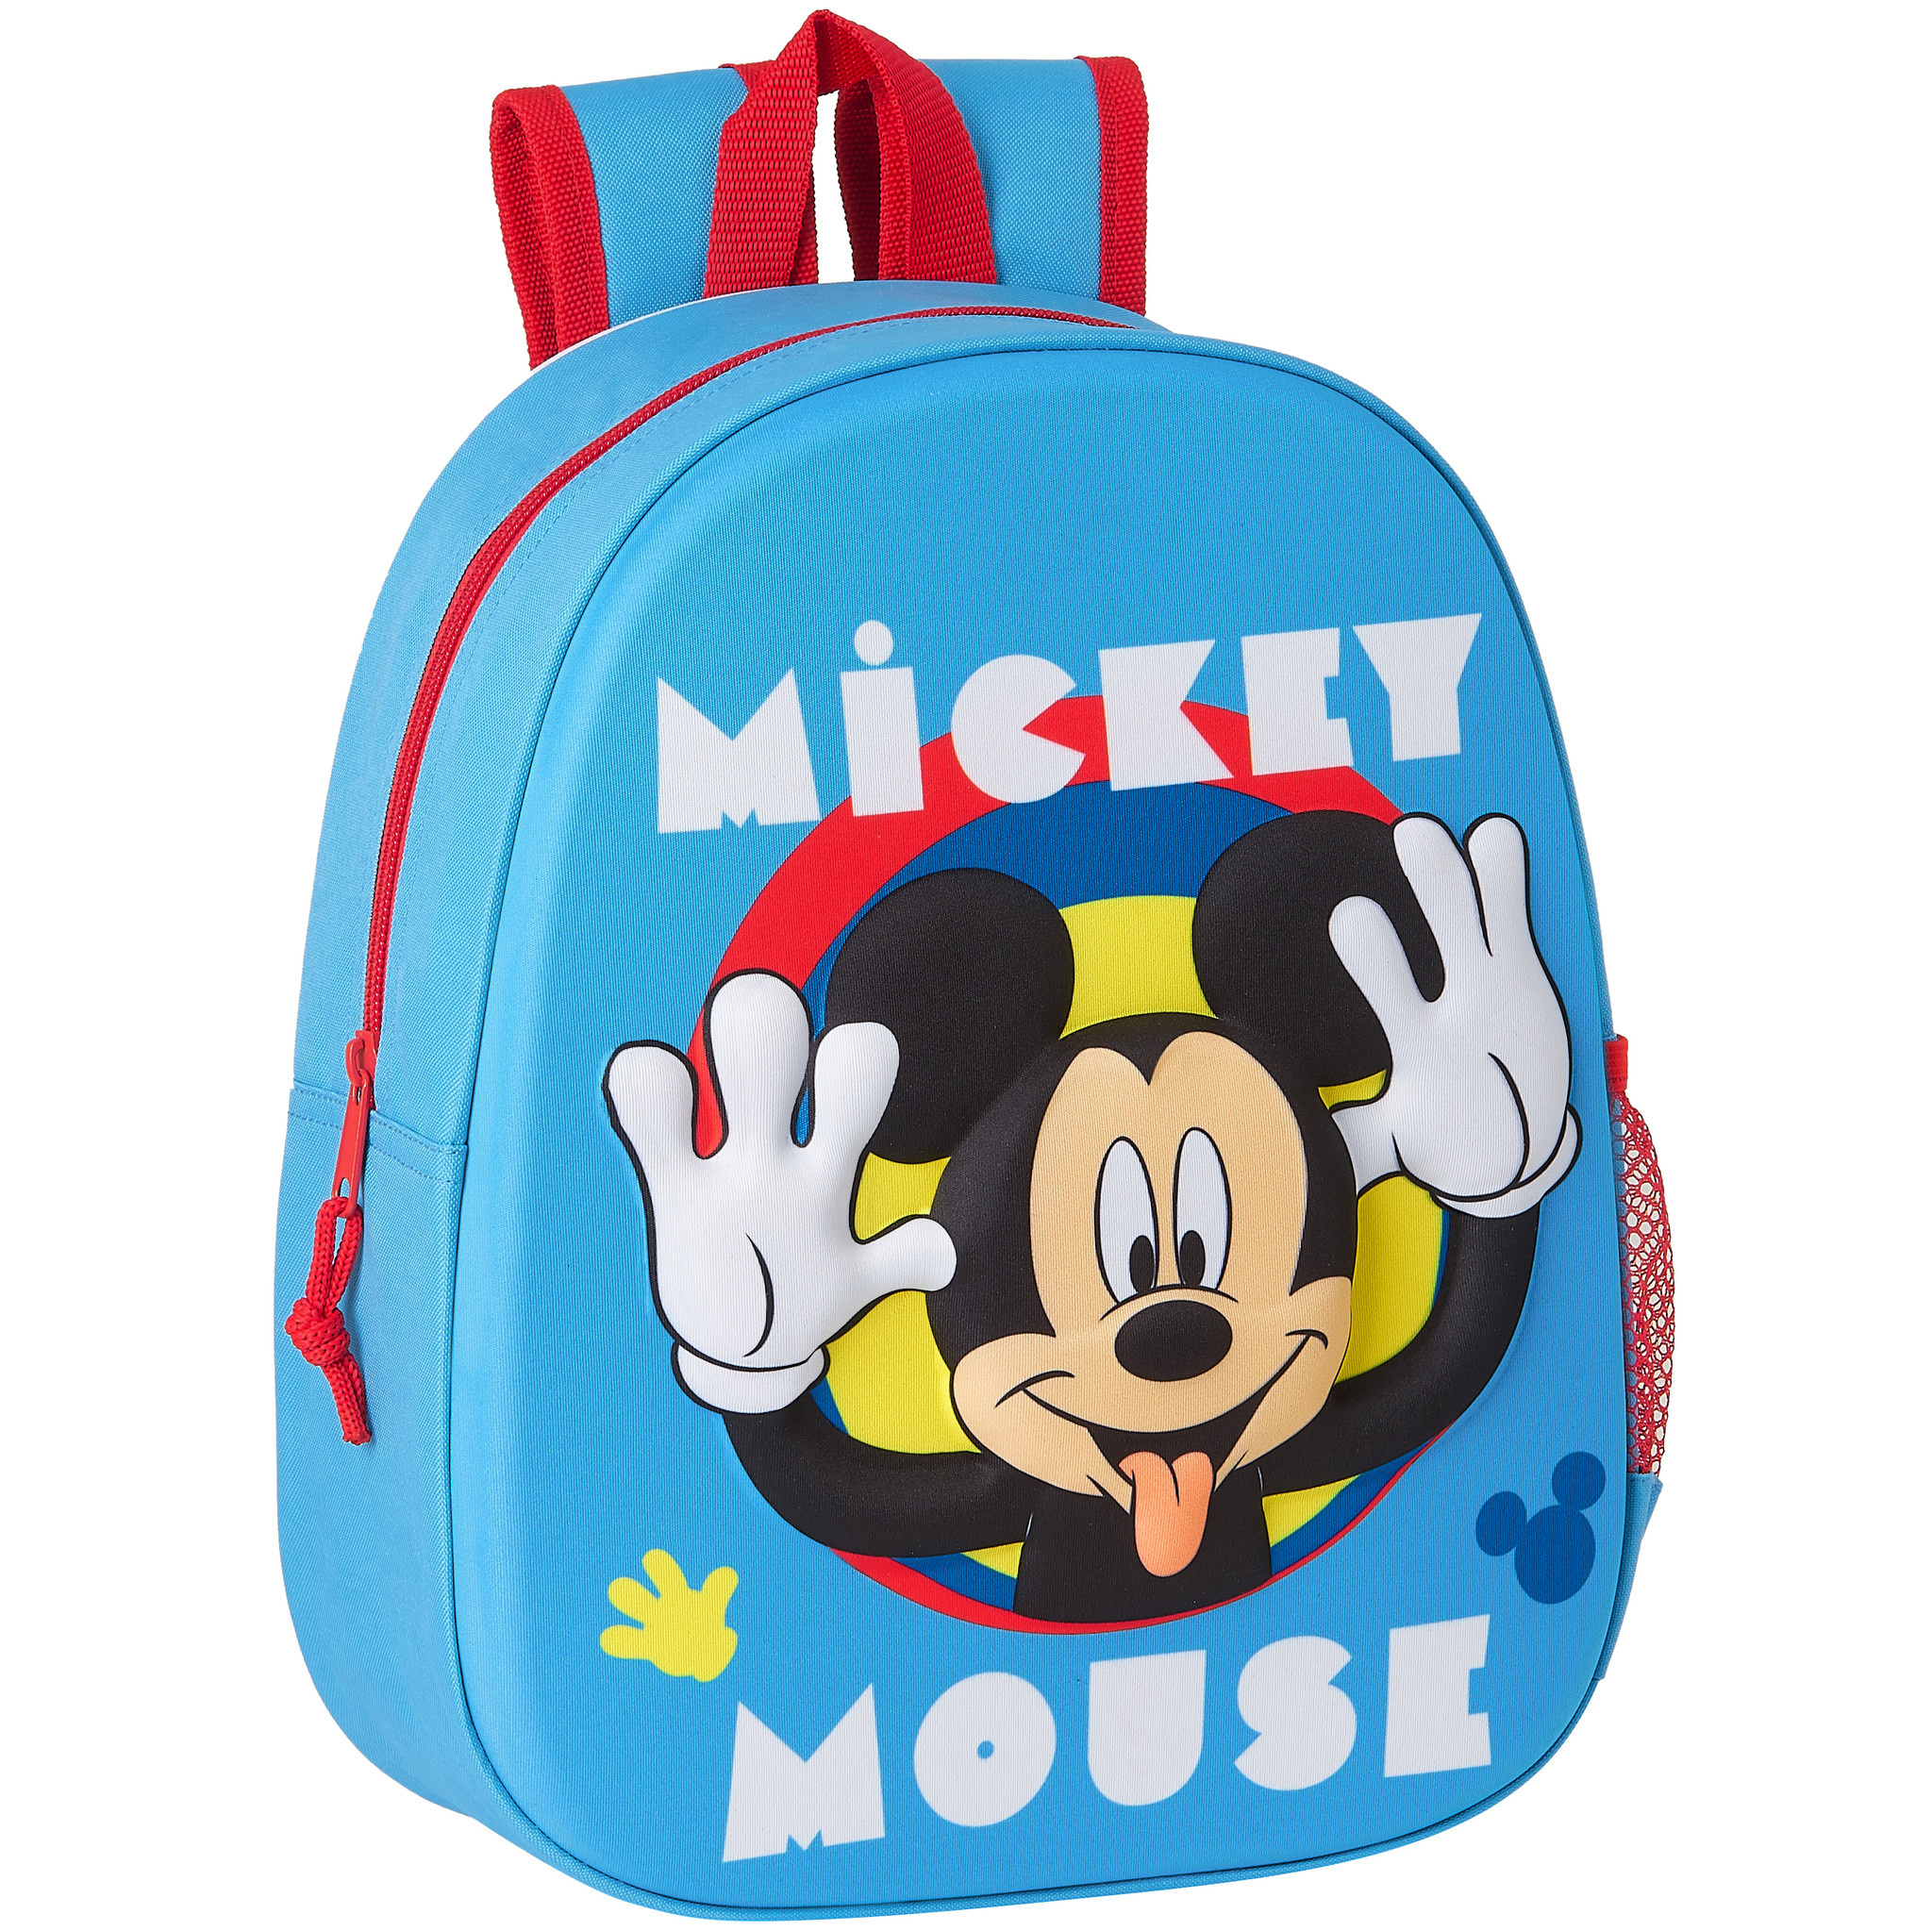 Disney Mickey Mouse Backpack 3D Funny - 33 x 27 x 10 cm - Polyester